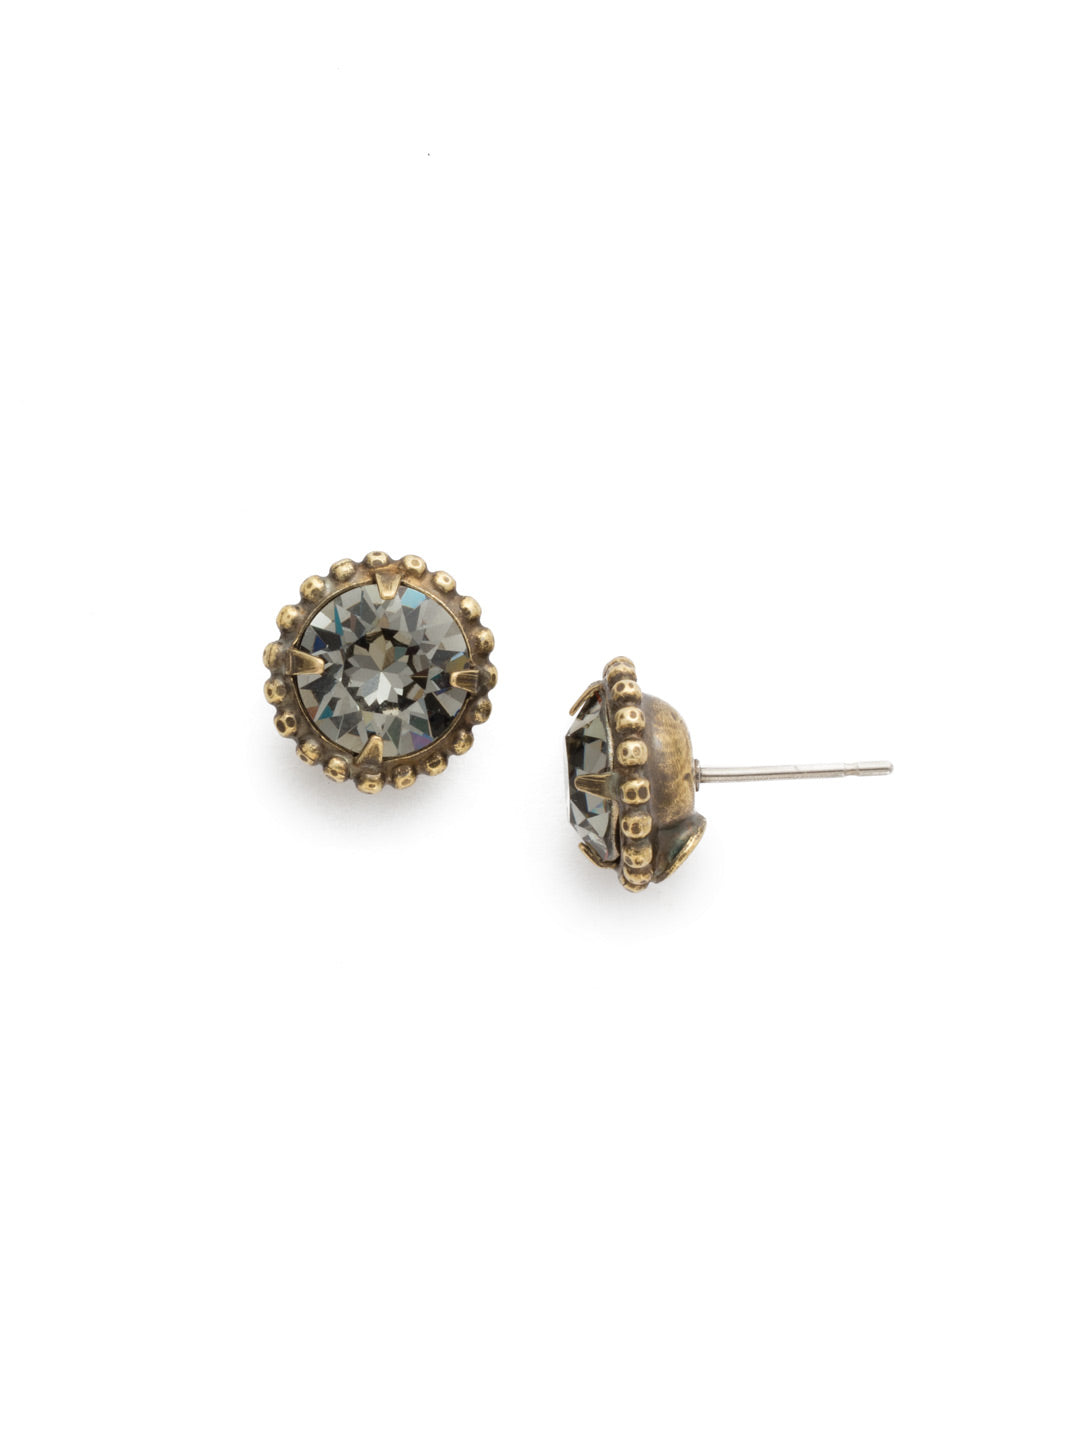 Simplicity Stud Earrings - EBY38AGBD - <p>A timeless classic, the Simplicity Stud Earrings feature round cut crystals in a variety of colors; accented with a halo of metal beaded detail. Need help picking a stud? <a href="https://www.sorrelli.com/blogs/sisterhood/round-stud-earrings-101-a-rundown-of-sizes-styles-and-sparkle">Check out our size guide!</a> From Sorrelli's Black Diamond collection in our Antique Gold-tone finish.</p>